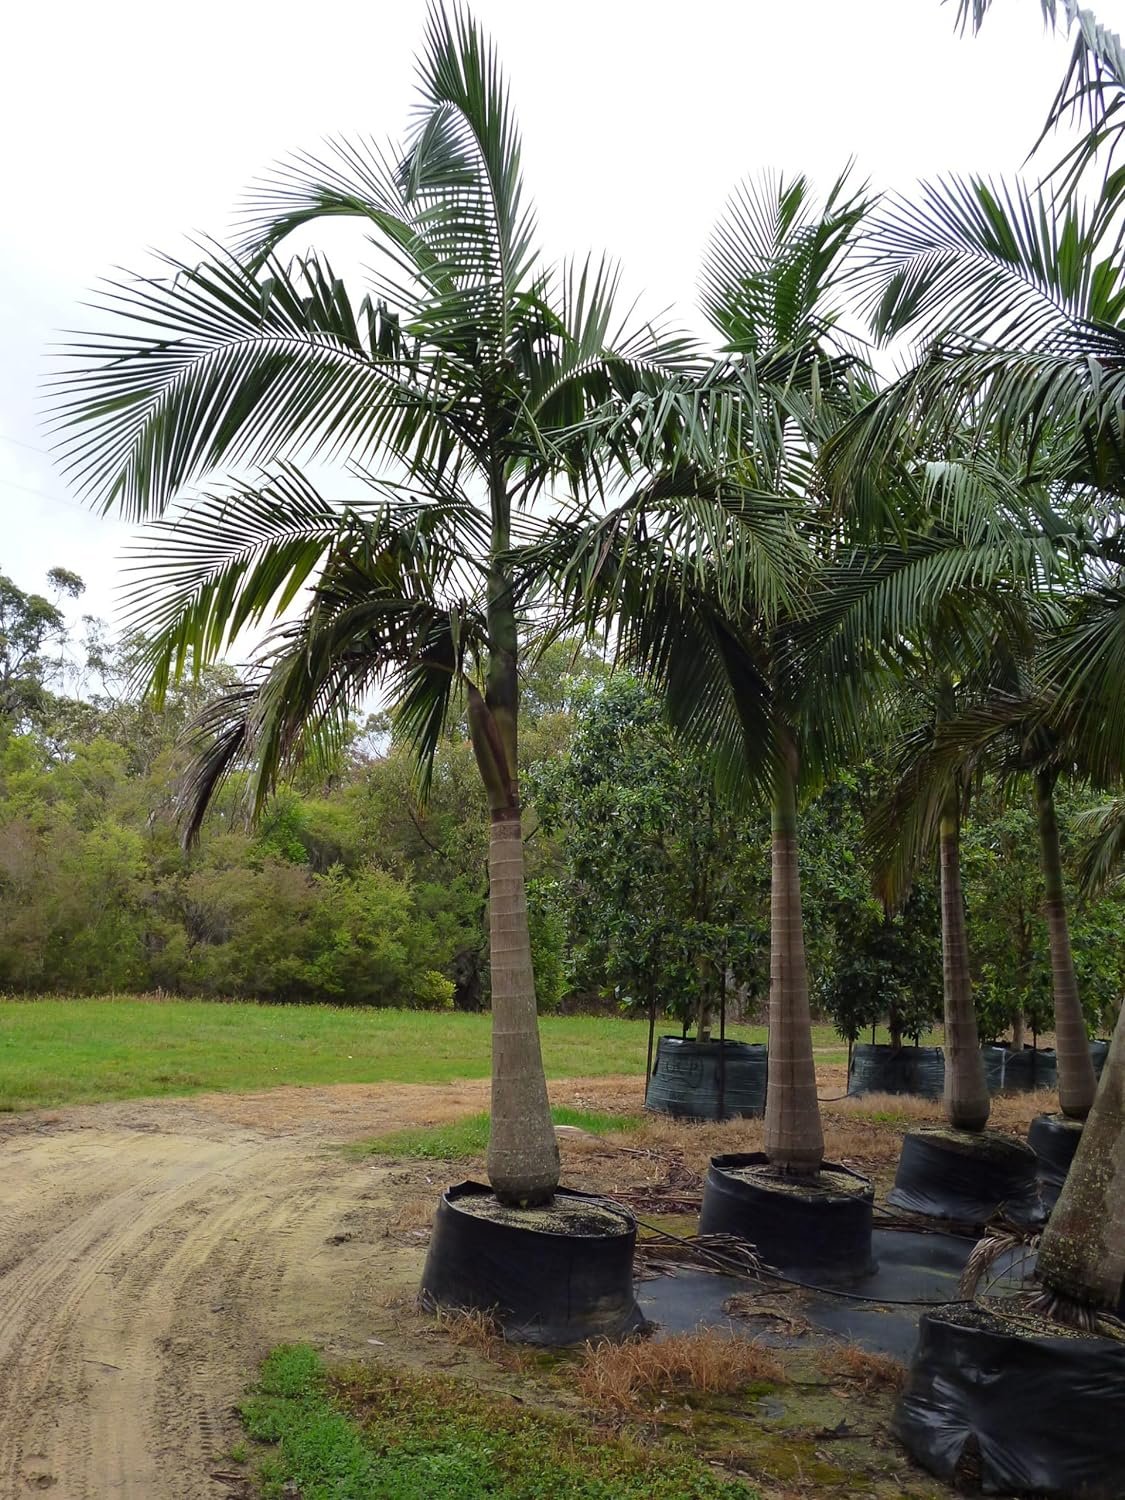 King Palm - Live Plant in a 3 Gallon Growers Pot - Archontophoenix Alexandrae - Rare Ornamental Palms of Florida - image 1 of 5